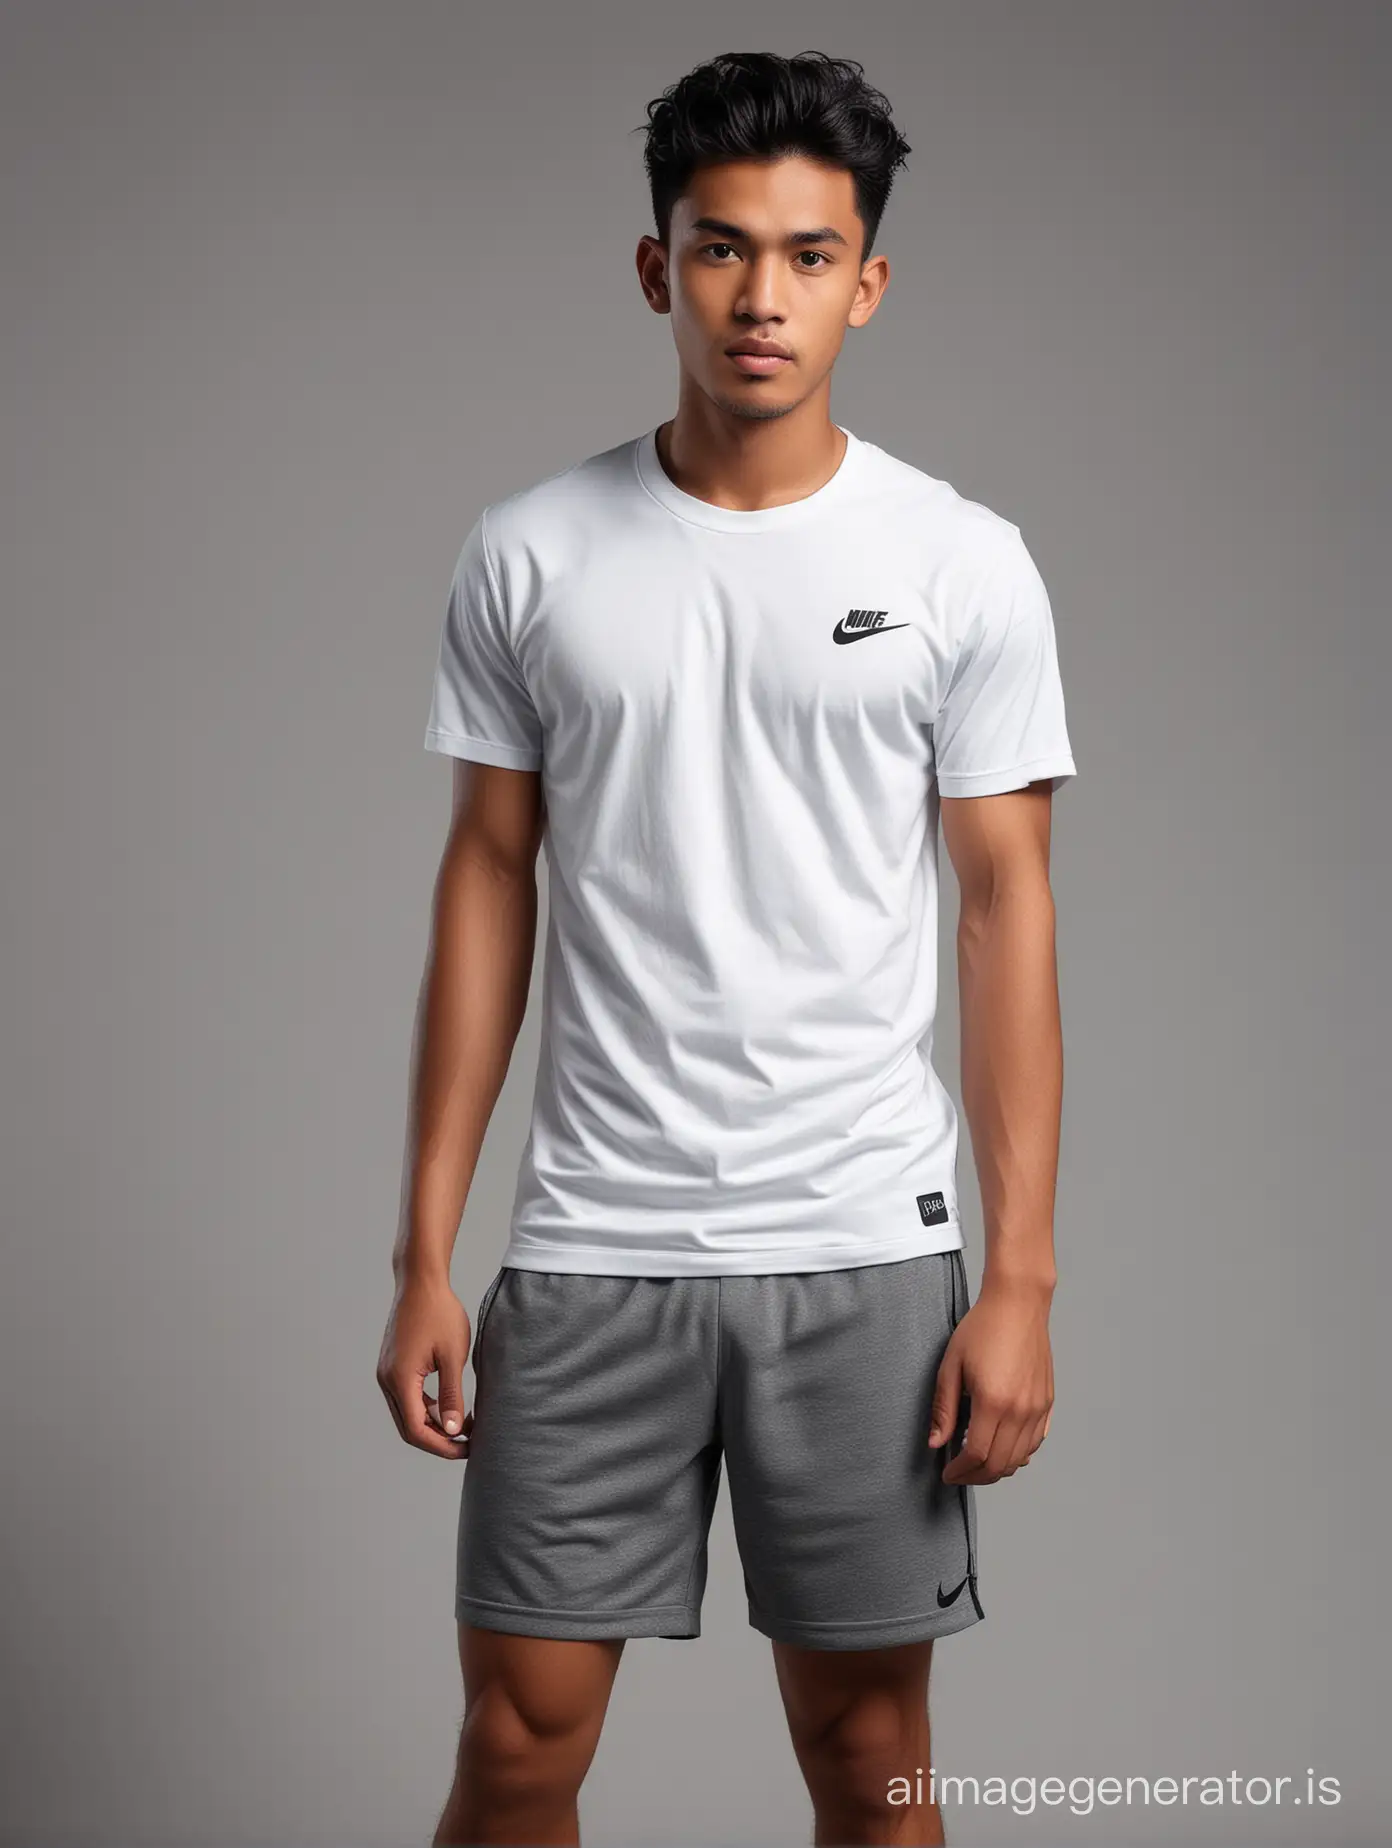 Stylish-Indonesian-Man-Modeling-White-Nike-Outfit-and-Sneakers-Against-Charcoal-Black-Background